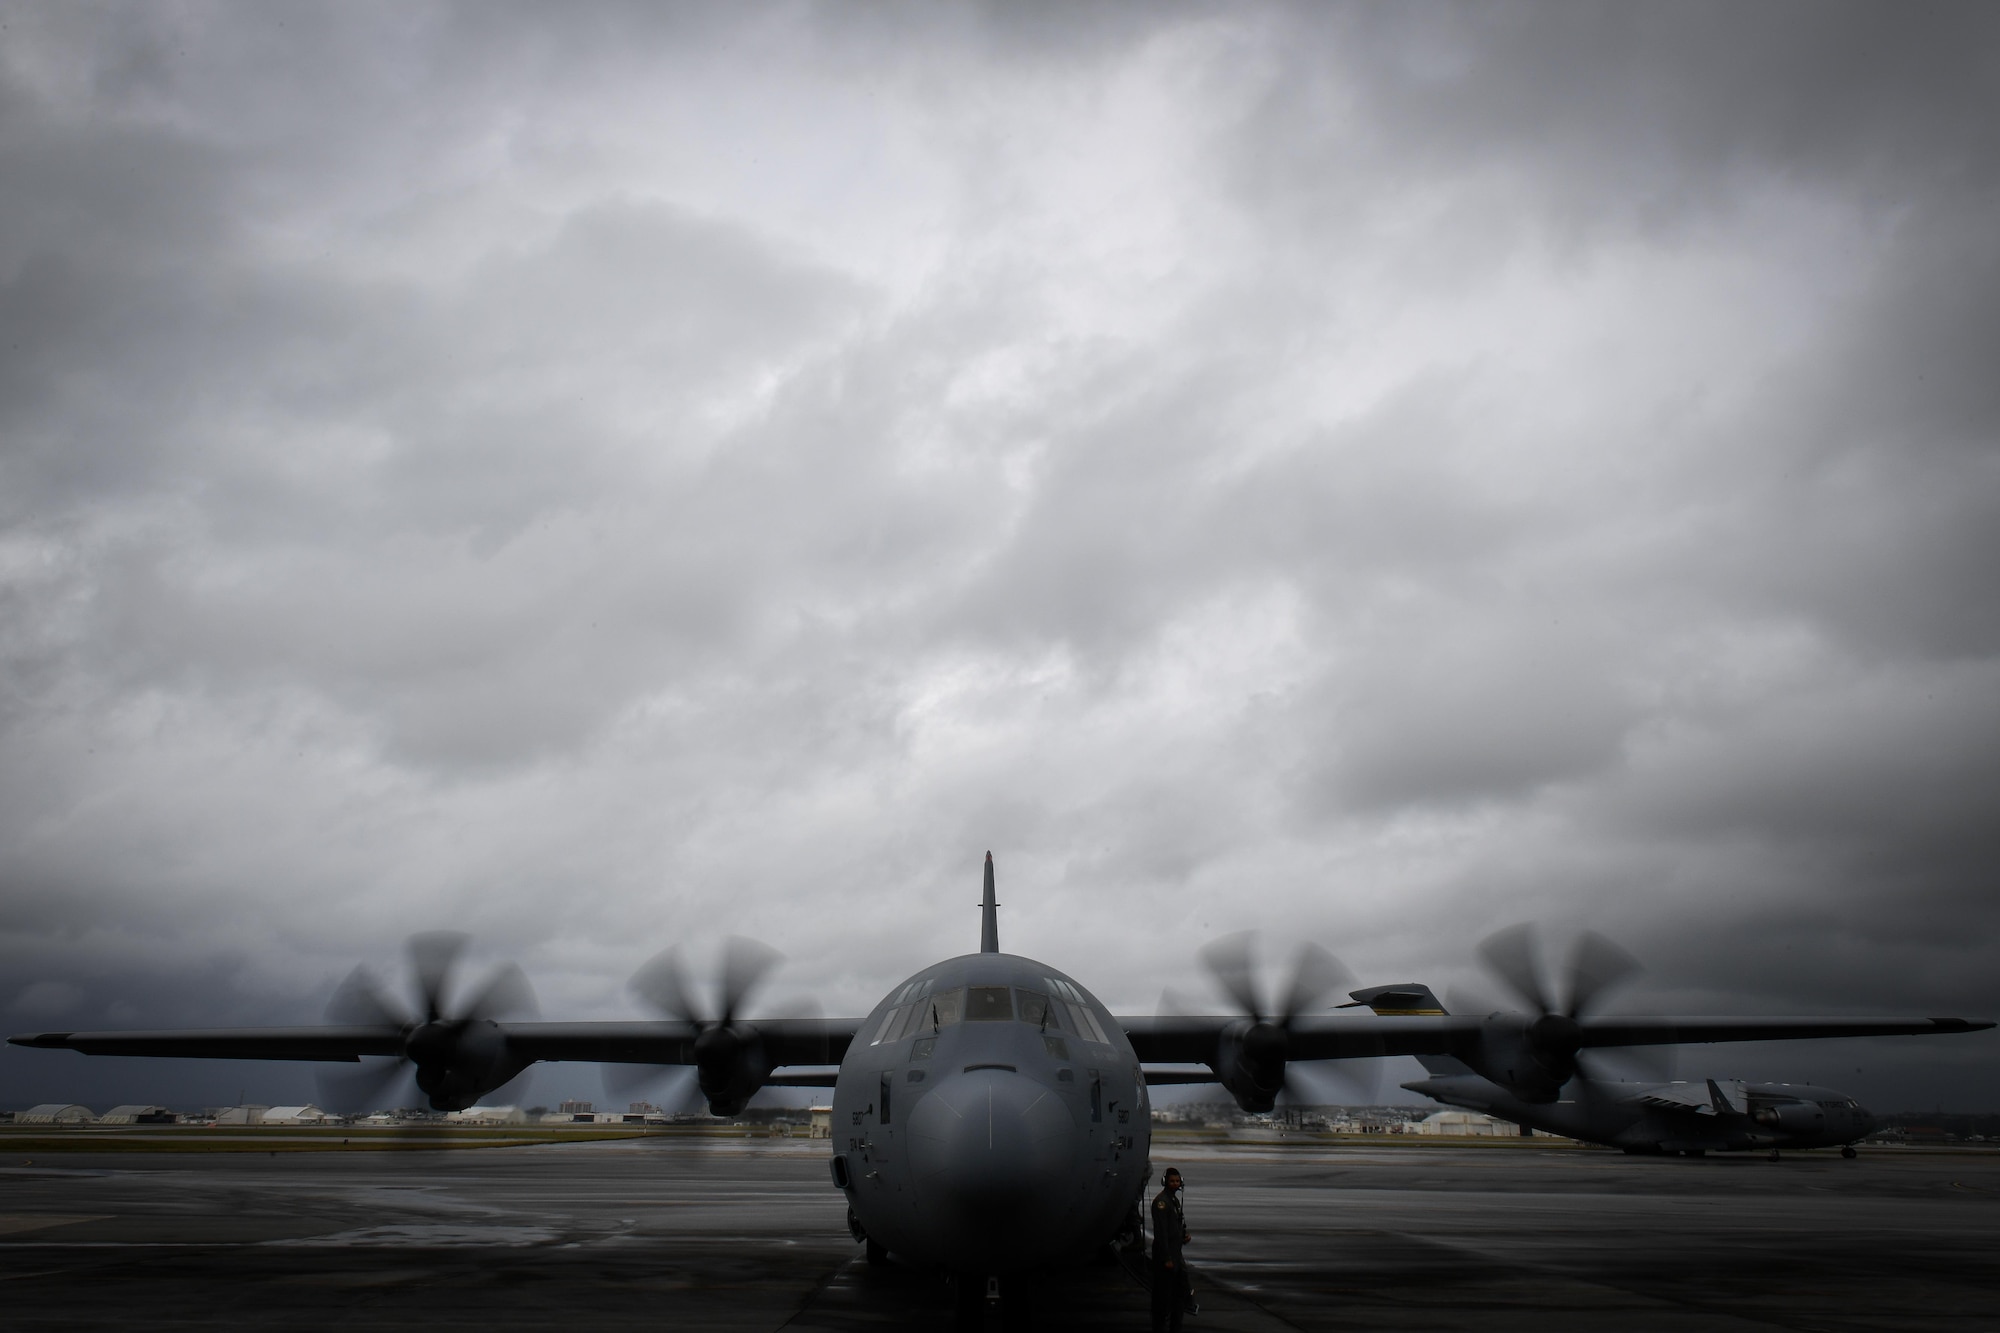 A loadmaster with the 36th Airlift Squadron performs a pre-flight inspection at Kadena Air Base, Japan, March 6, 2017. This is the first C-130J to be assigned to Pacific Air Forces. Yokota serves as the primary Western Pacific airlift hub for U.S. Air Force peacetime and contingency operations. Missions include tactical air land, airdrop, aeromedical evacuation, special operations and distinguished visitor airlift. (U.S. Air Force photo by Staff Sgt. Michael Smith)